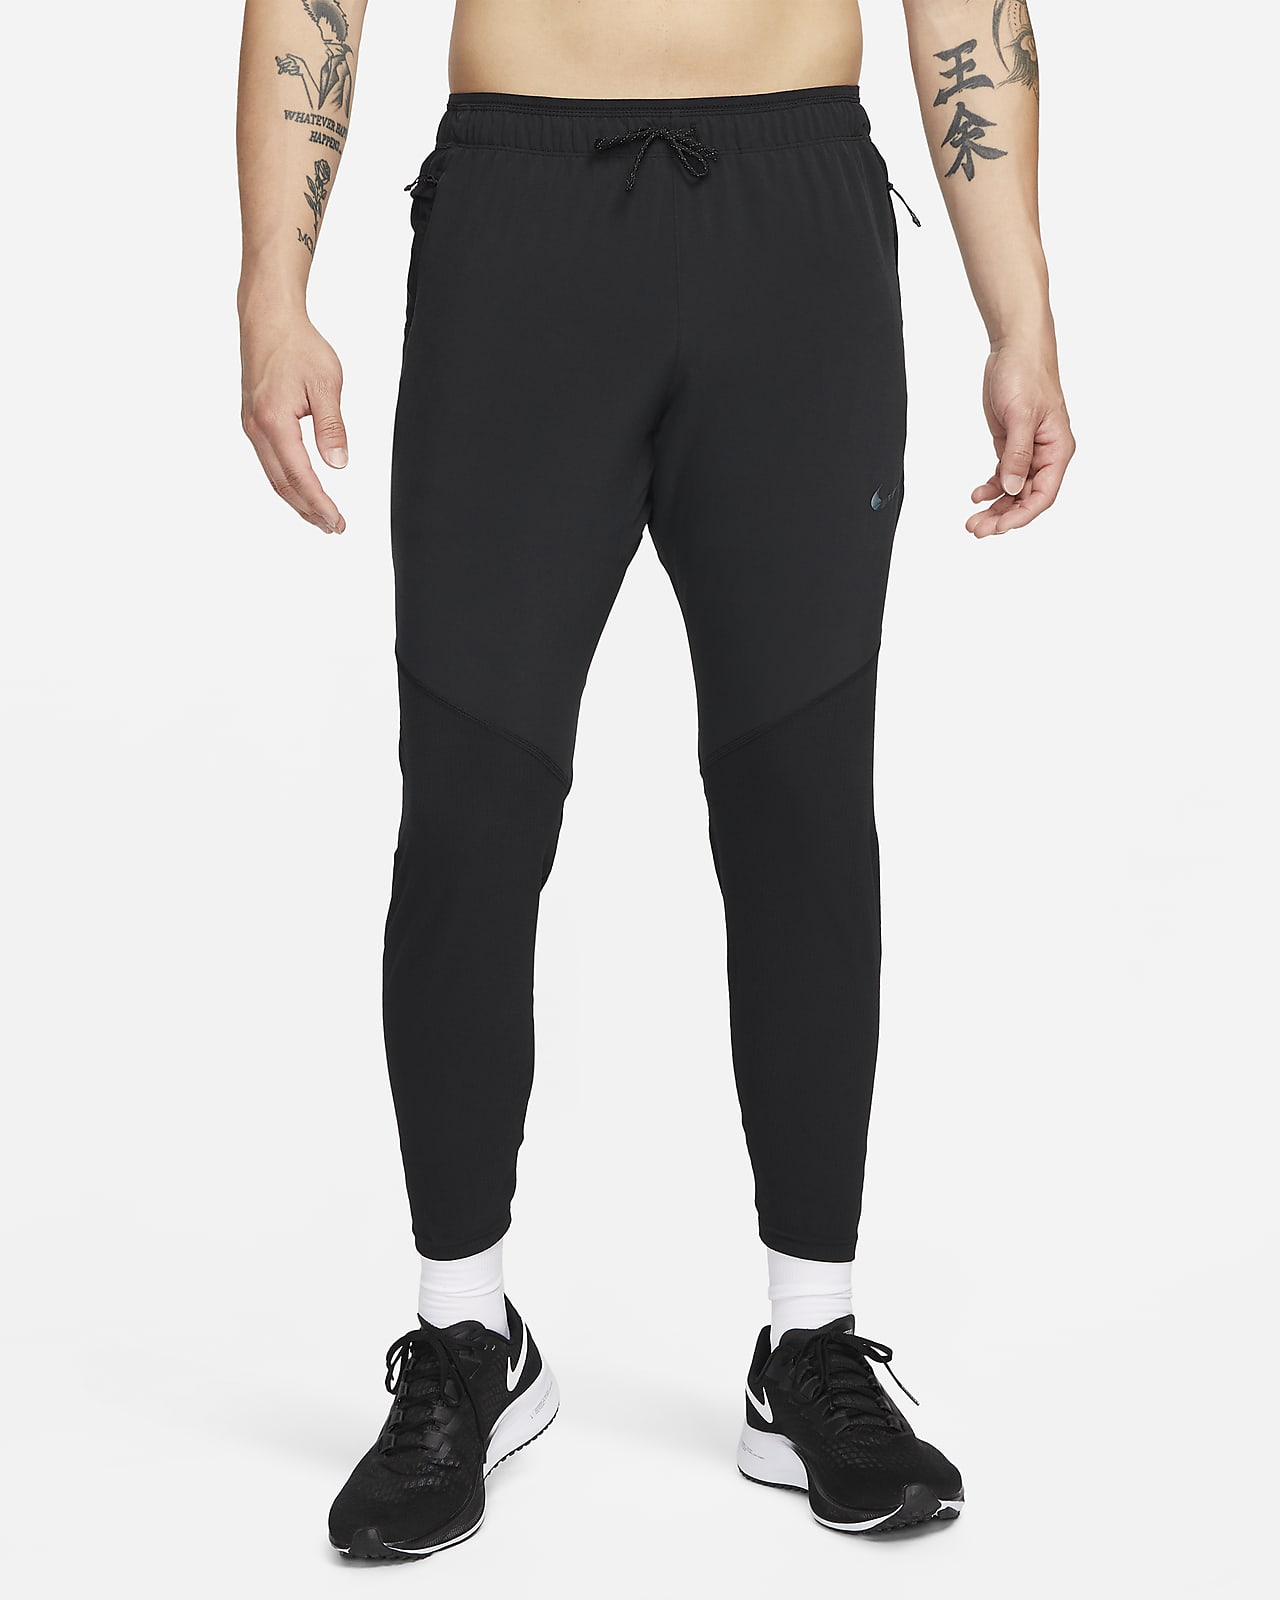 Vinegar Stop by Cow nike running trousers mens seed chicken warrant